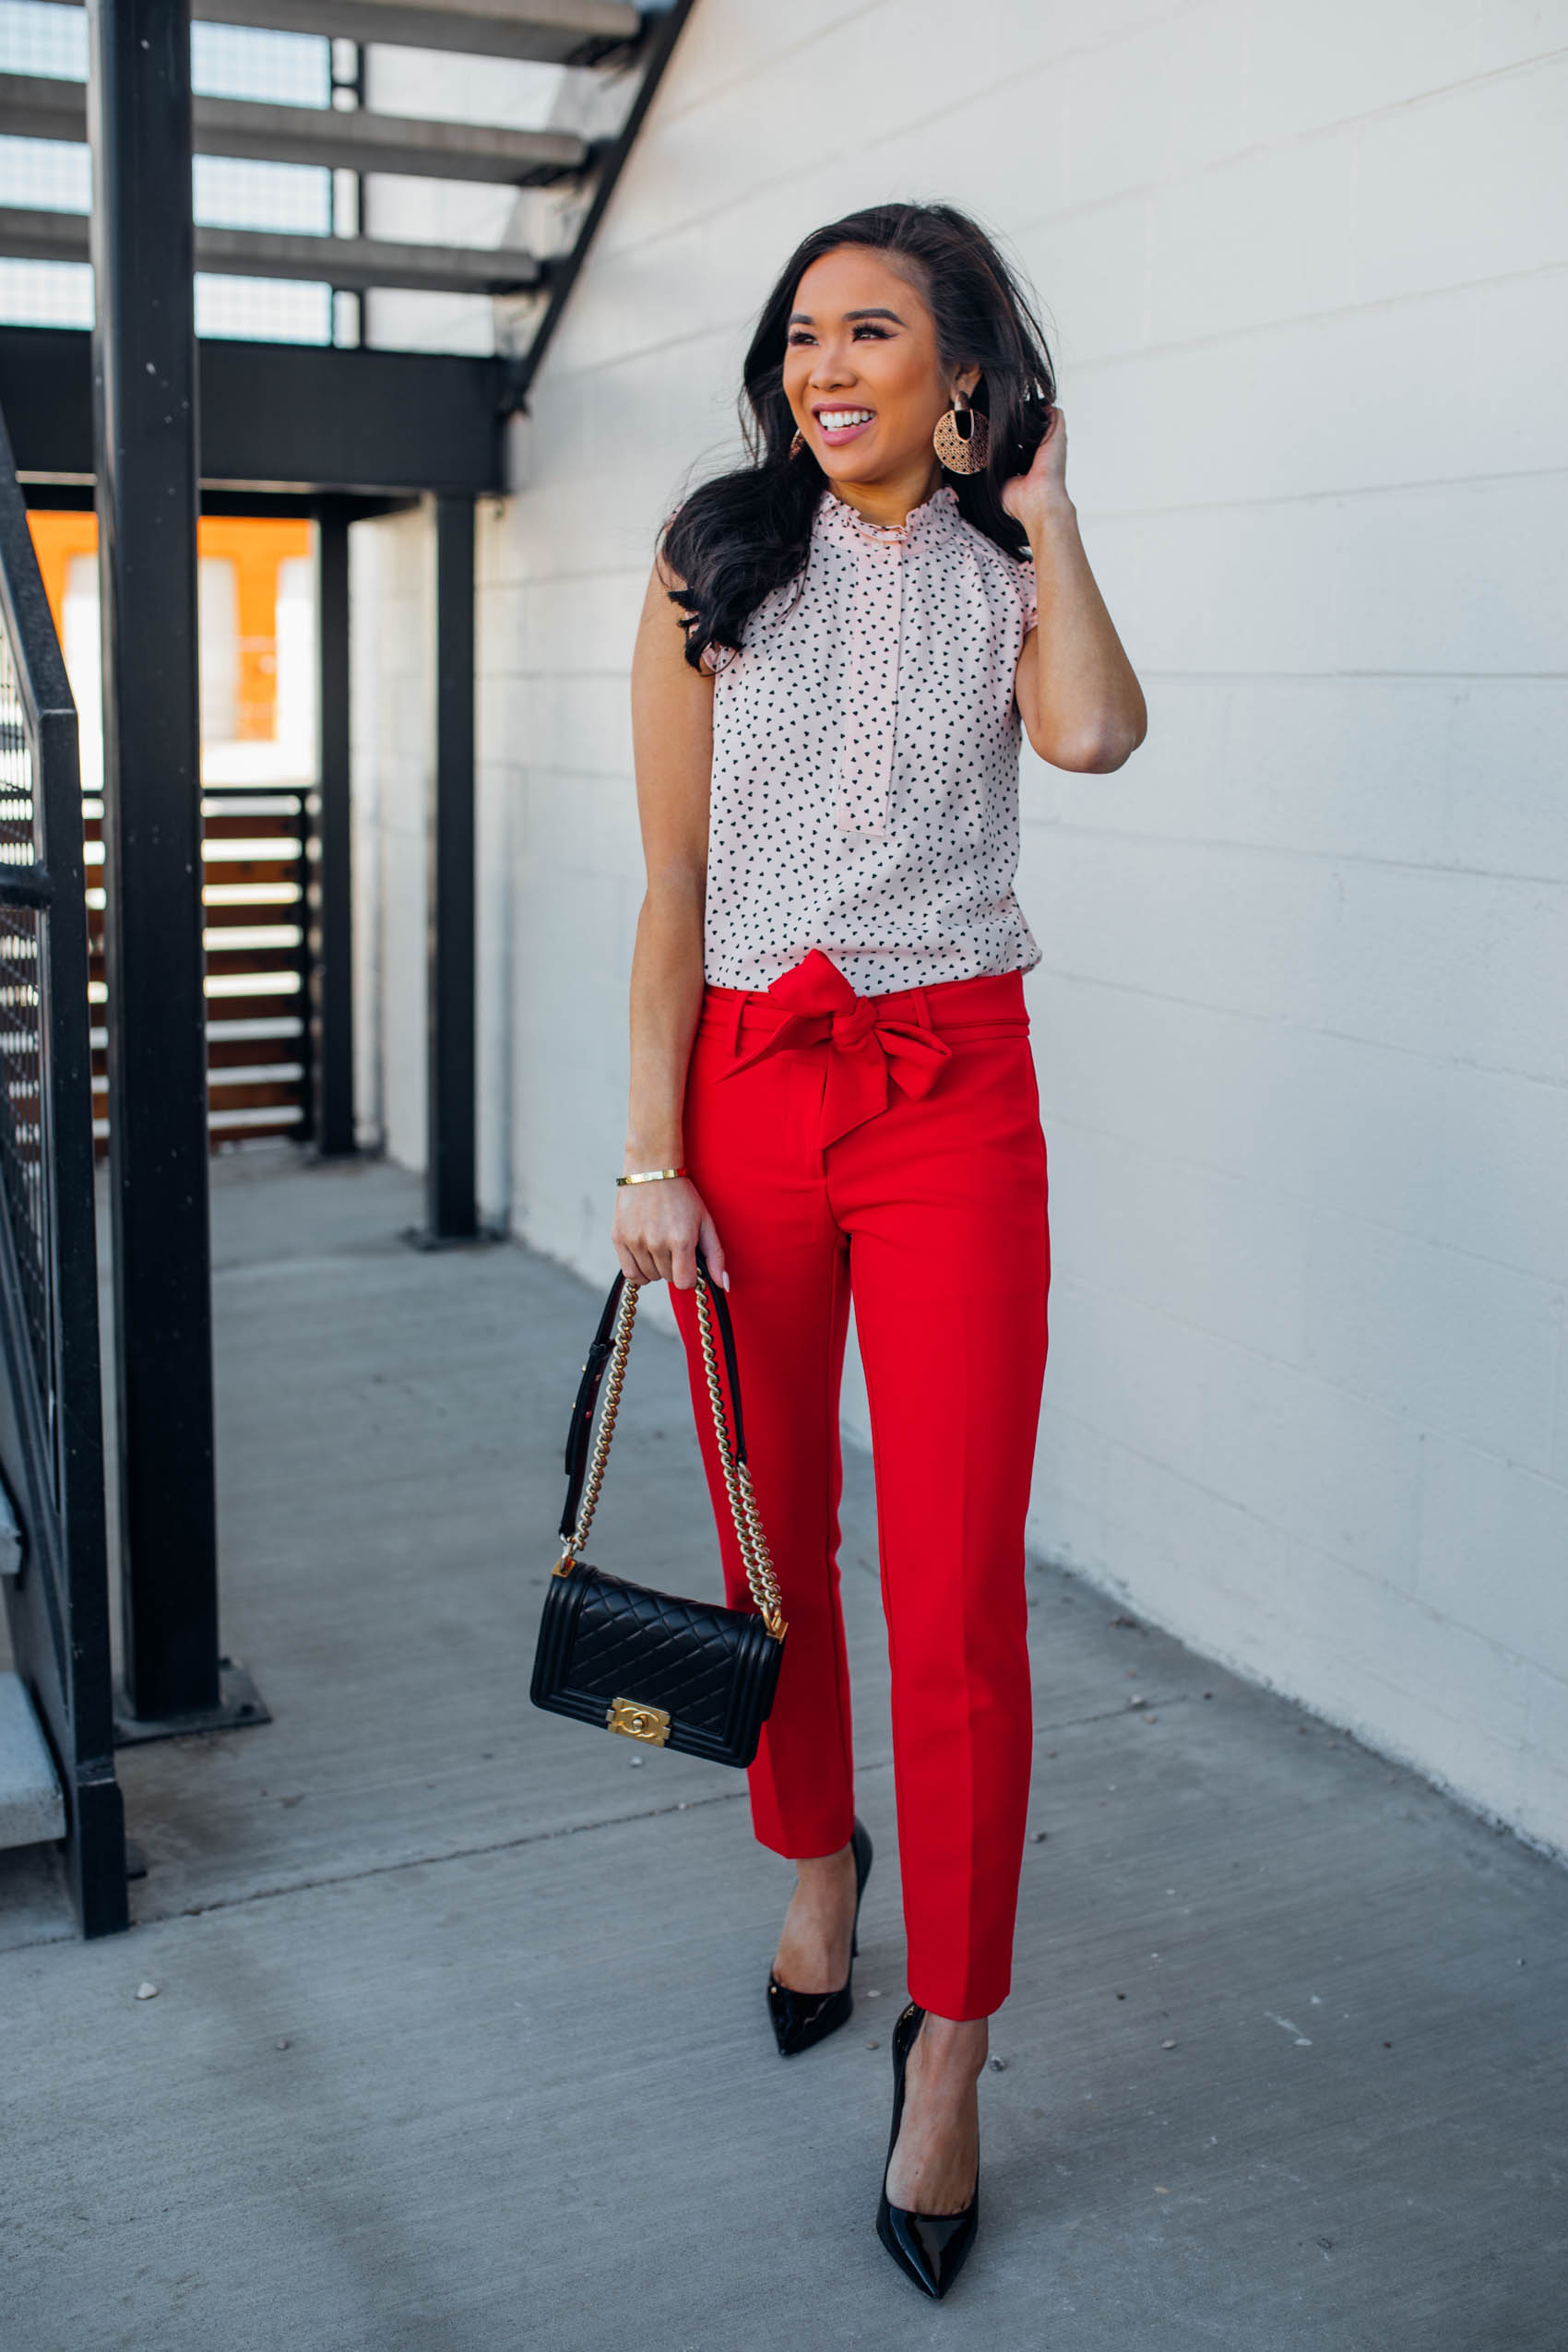 Blogger Hoang-Kim wears a pair of red tie-waist pants for a work outfit